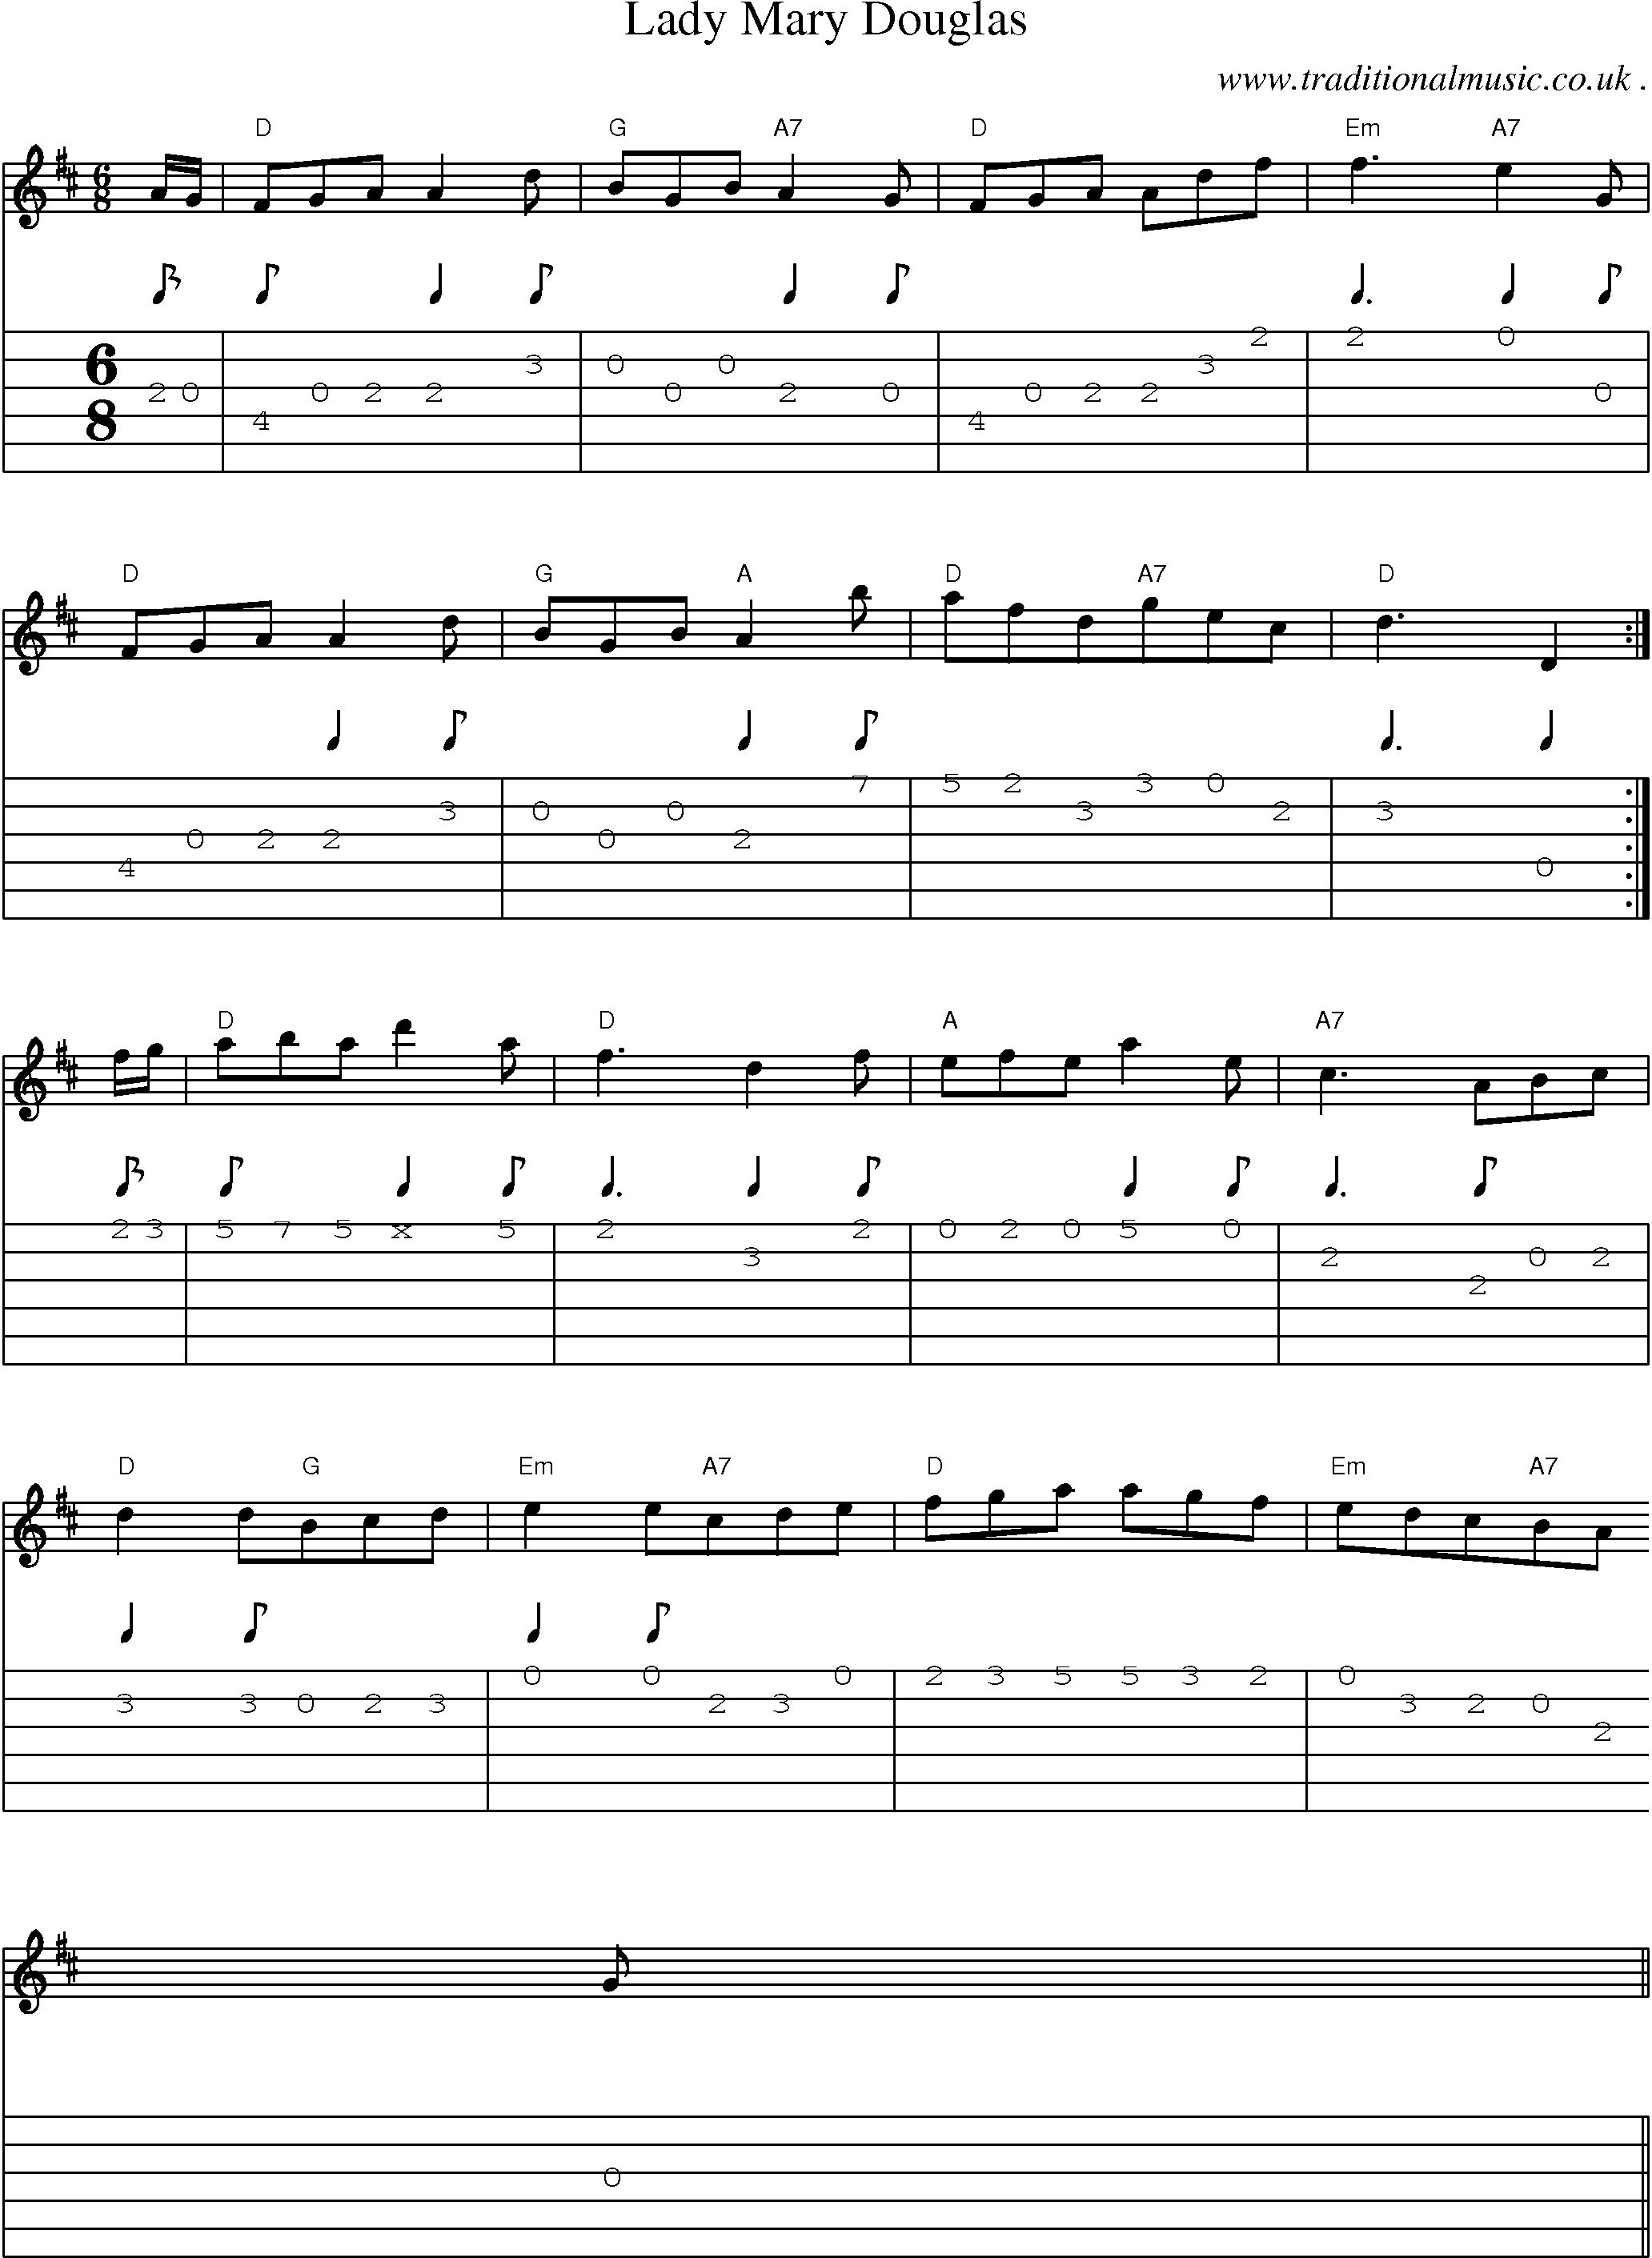 Sheet-Music and Guitar Tabs for Lady Mary Douglas